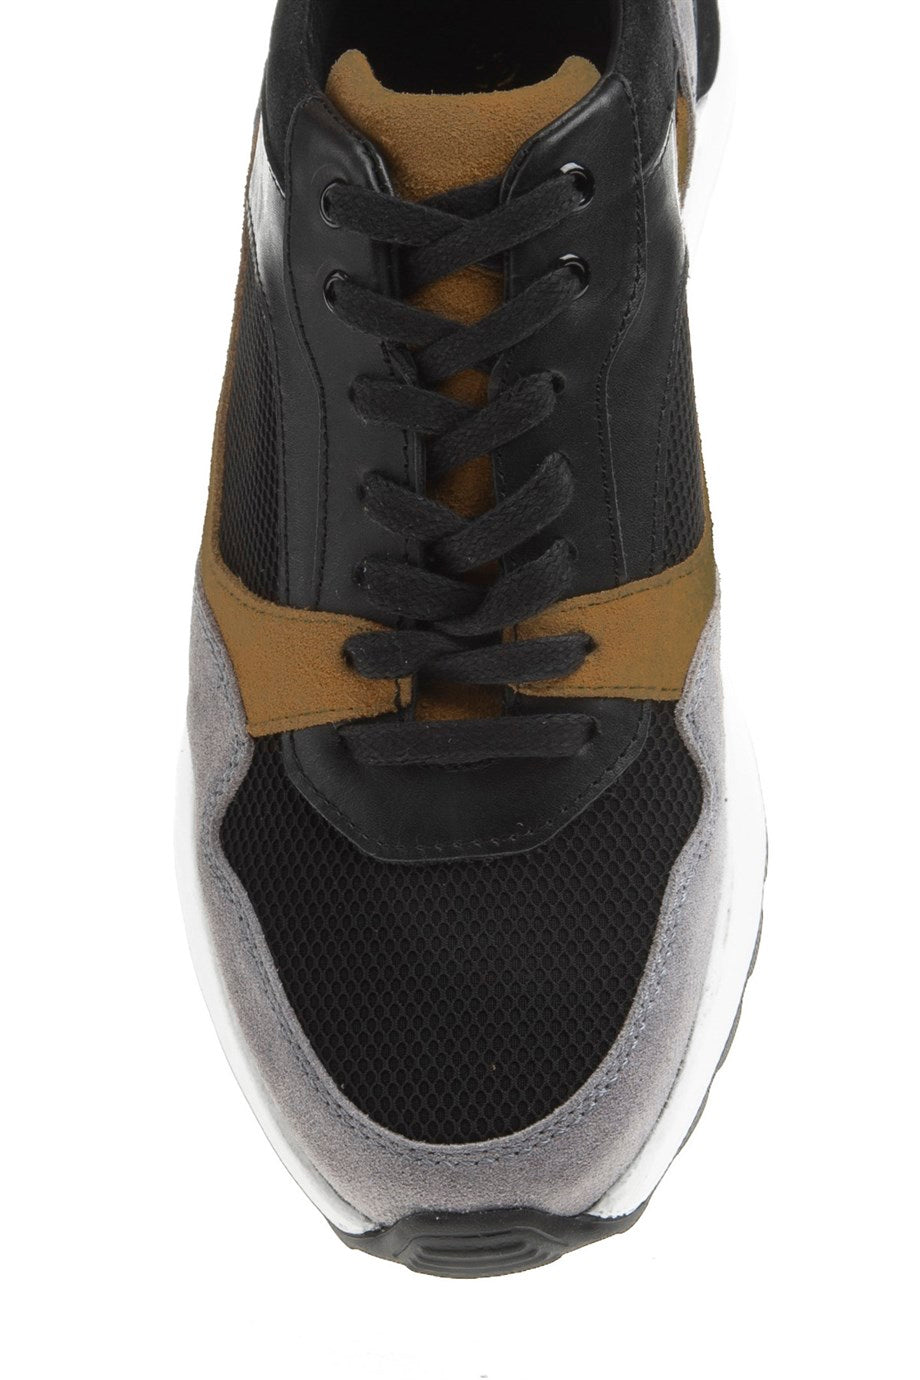 Eva Sole Genuine Leather Sports Shoes - MENSTYLEWITH